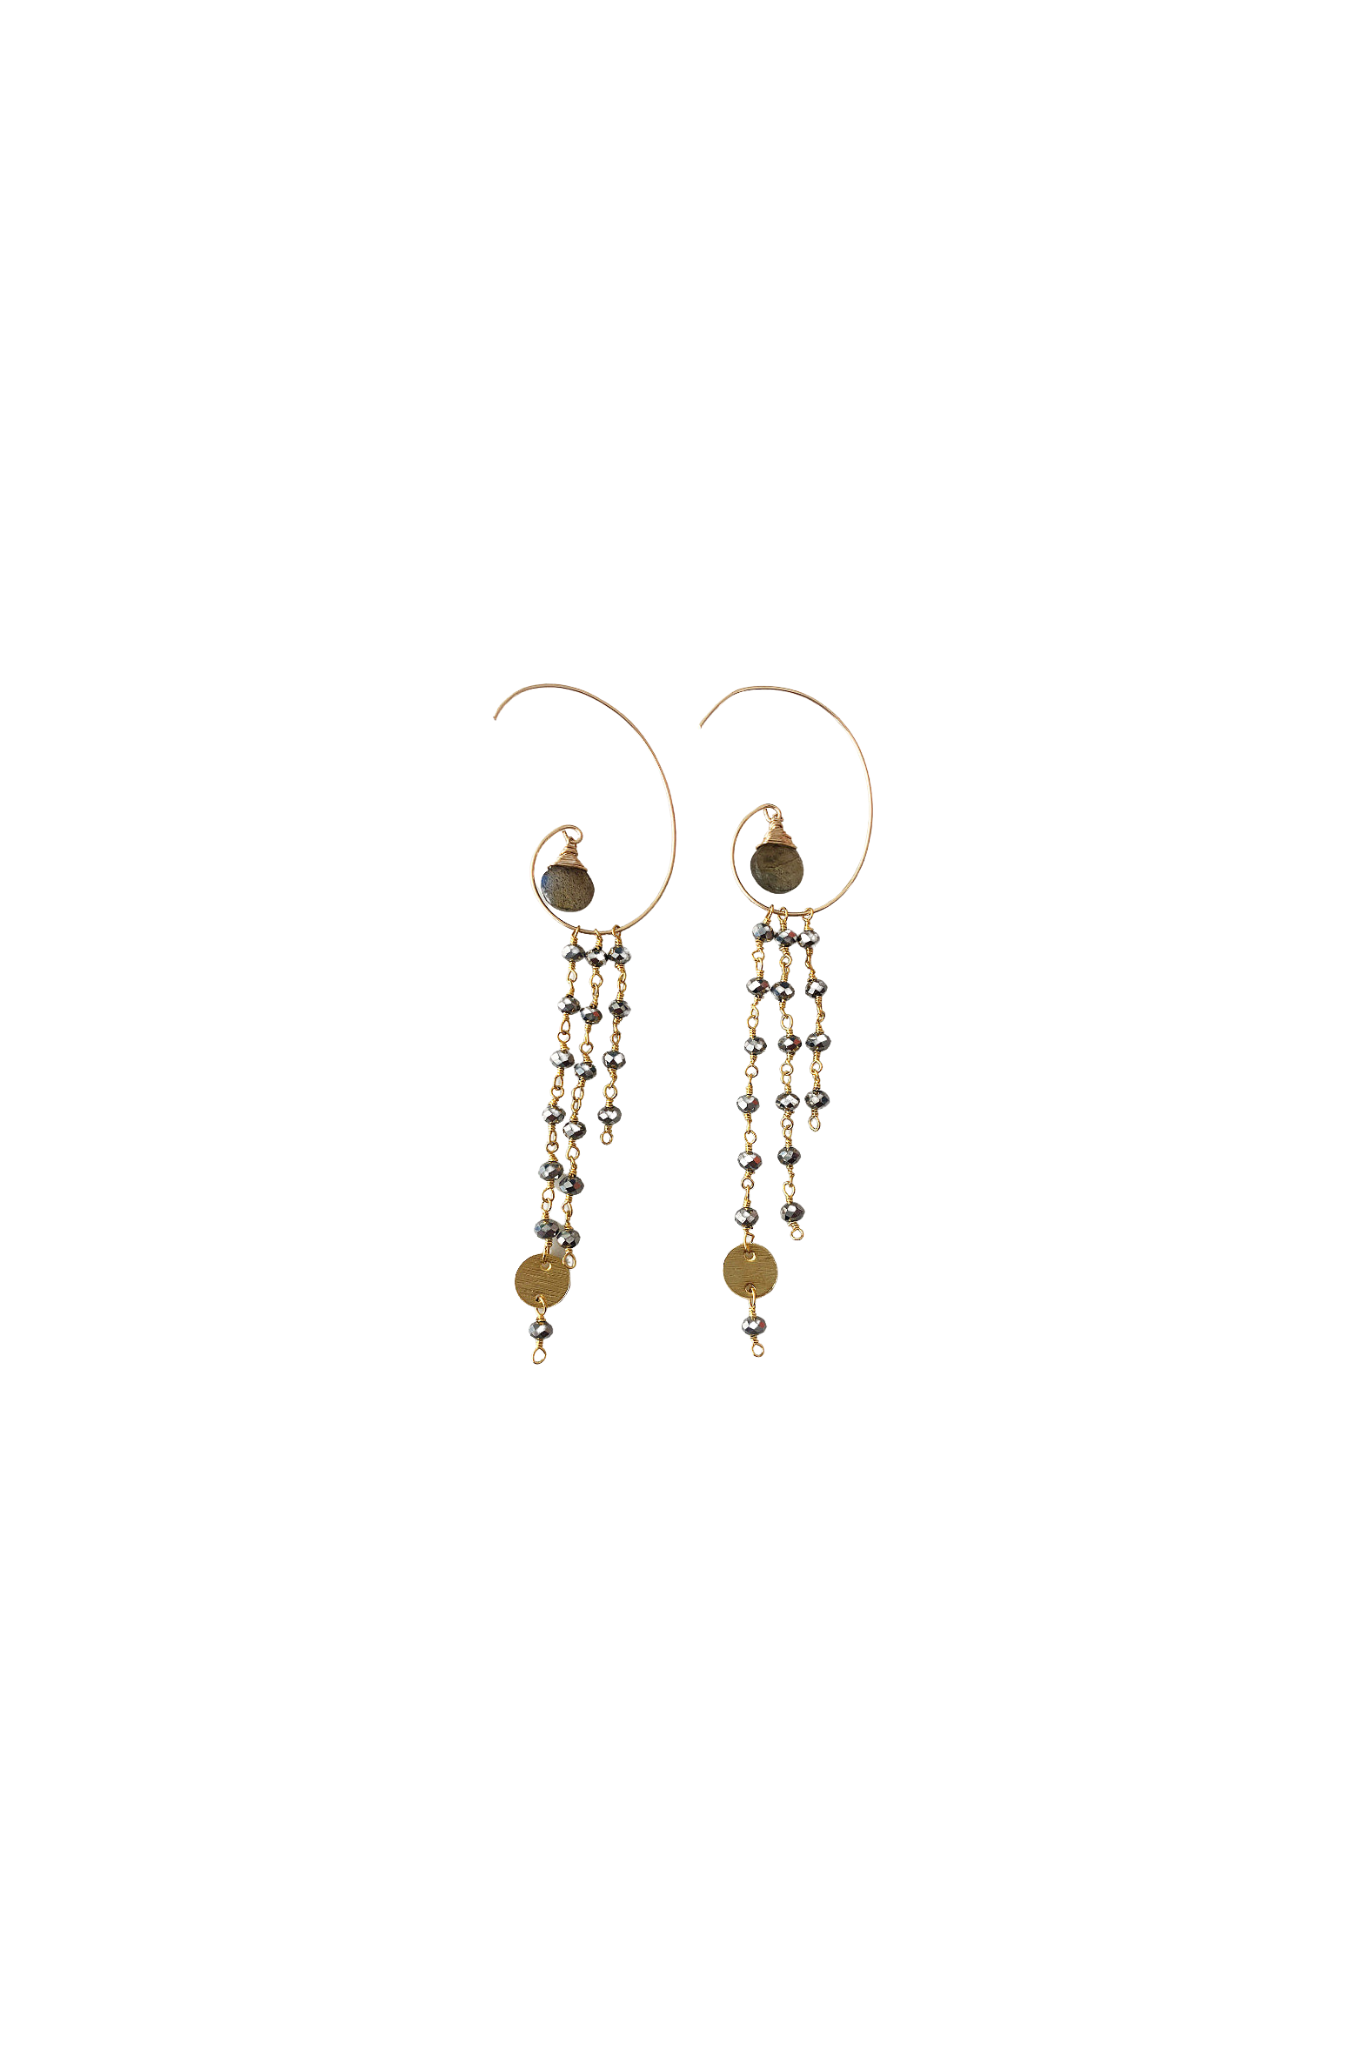 Jessica Hoop Earring in Labradorite and Pyrite